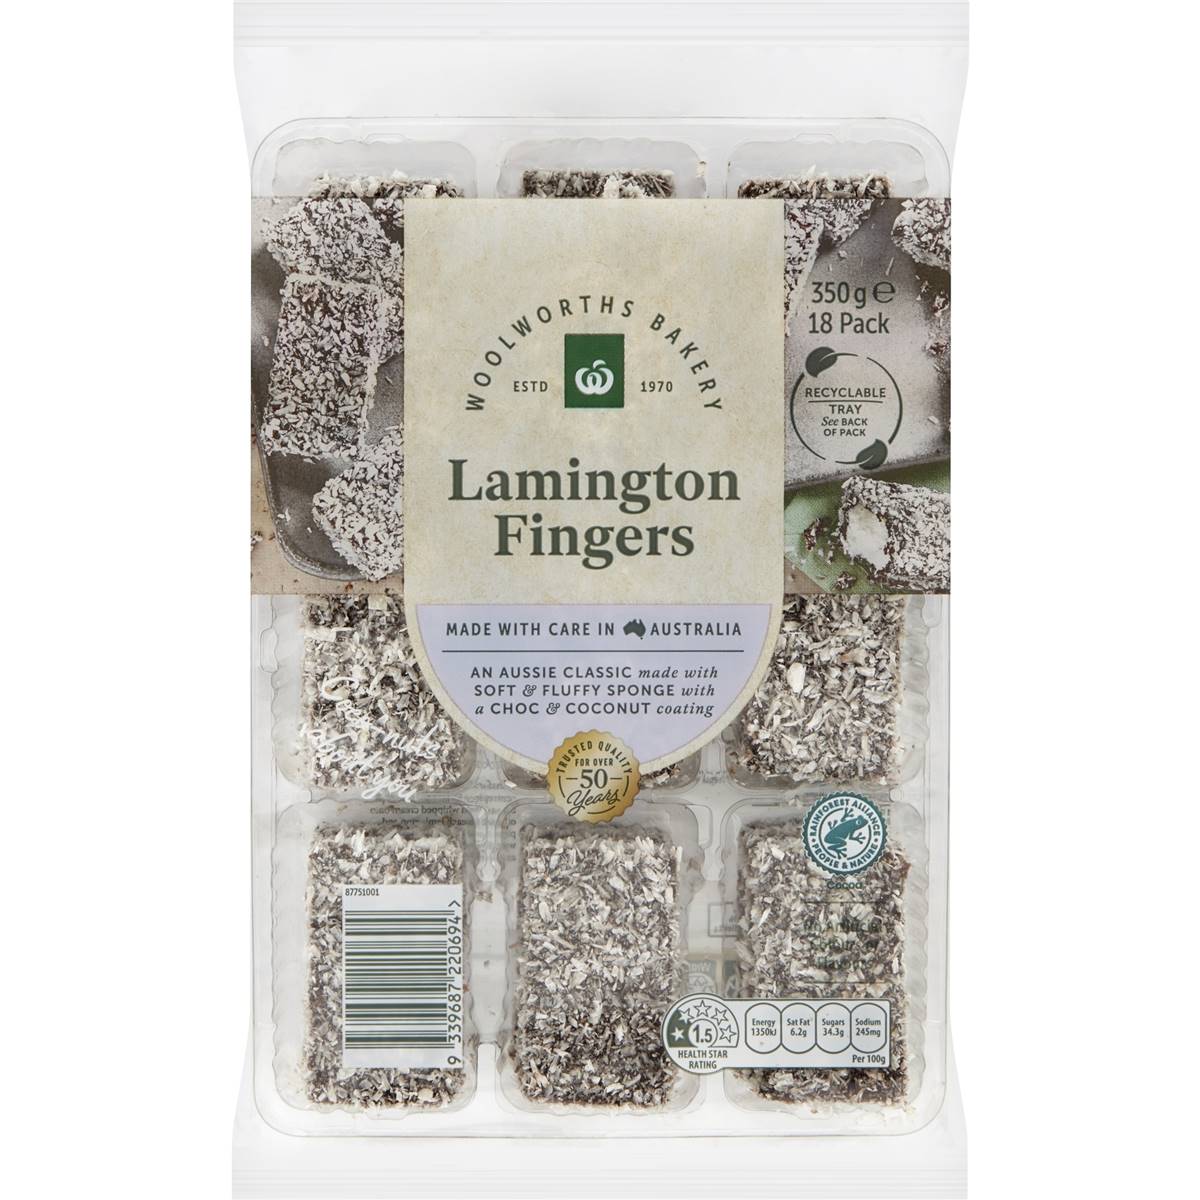 Calories in Woolworths Lamington Fingers